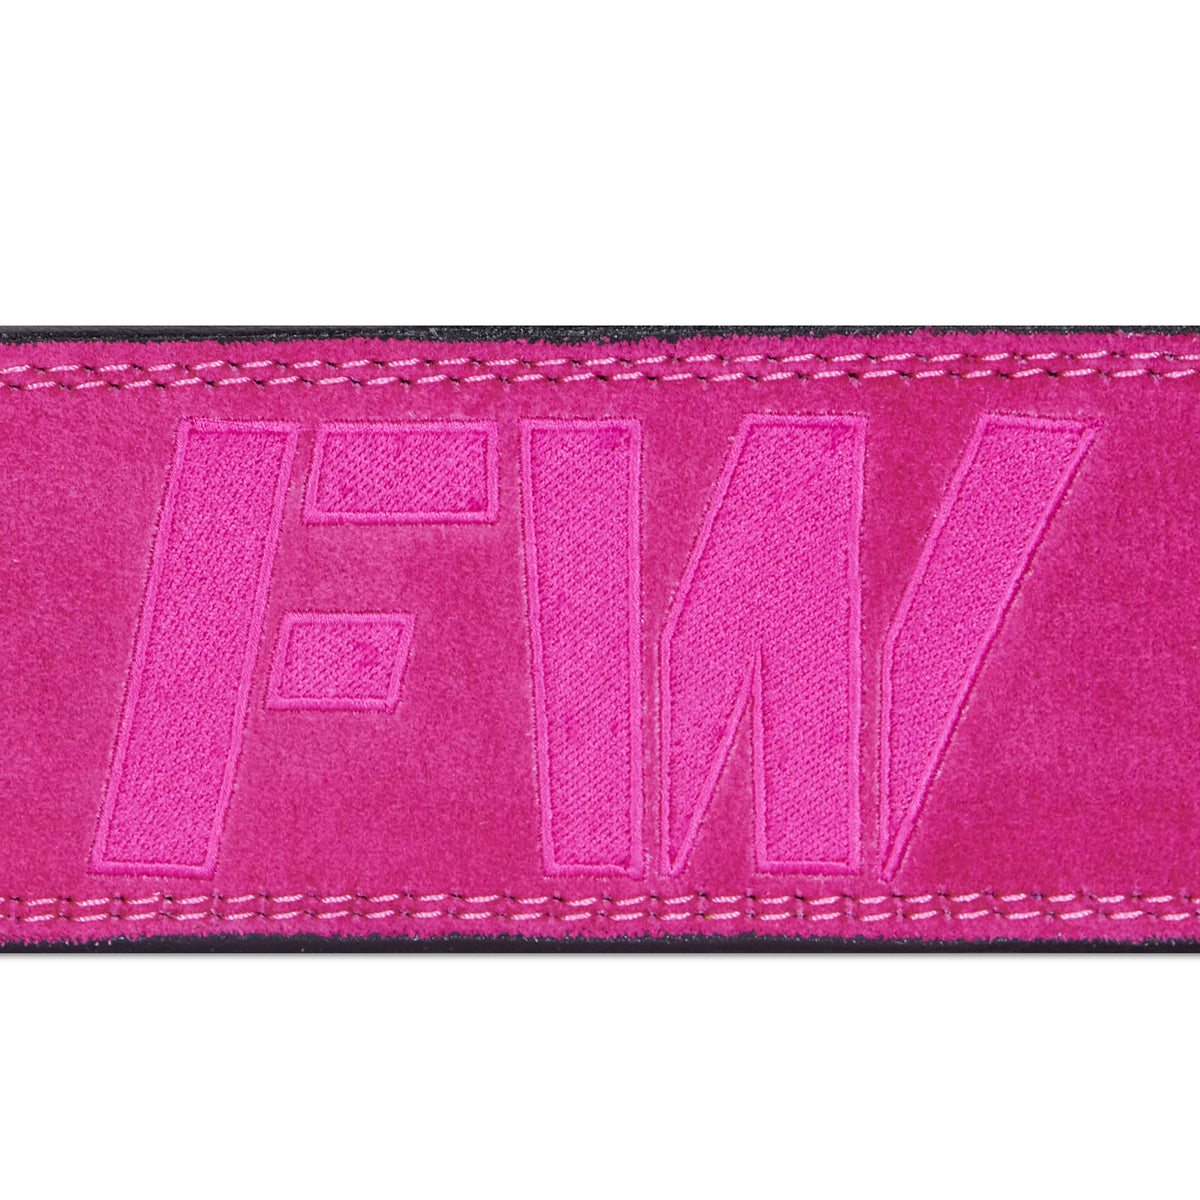 FW Lever Power-Lifting Belt - Pink Leather